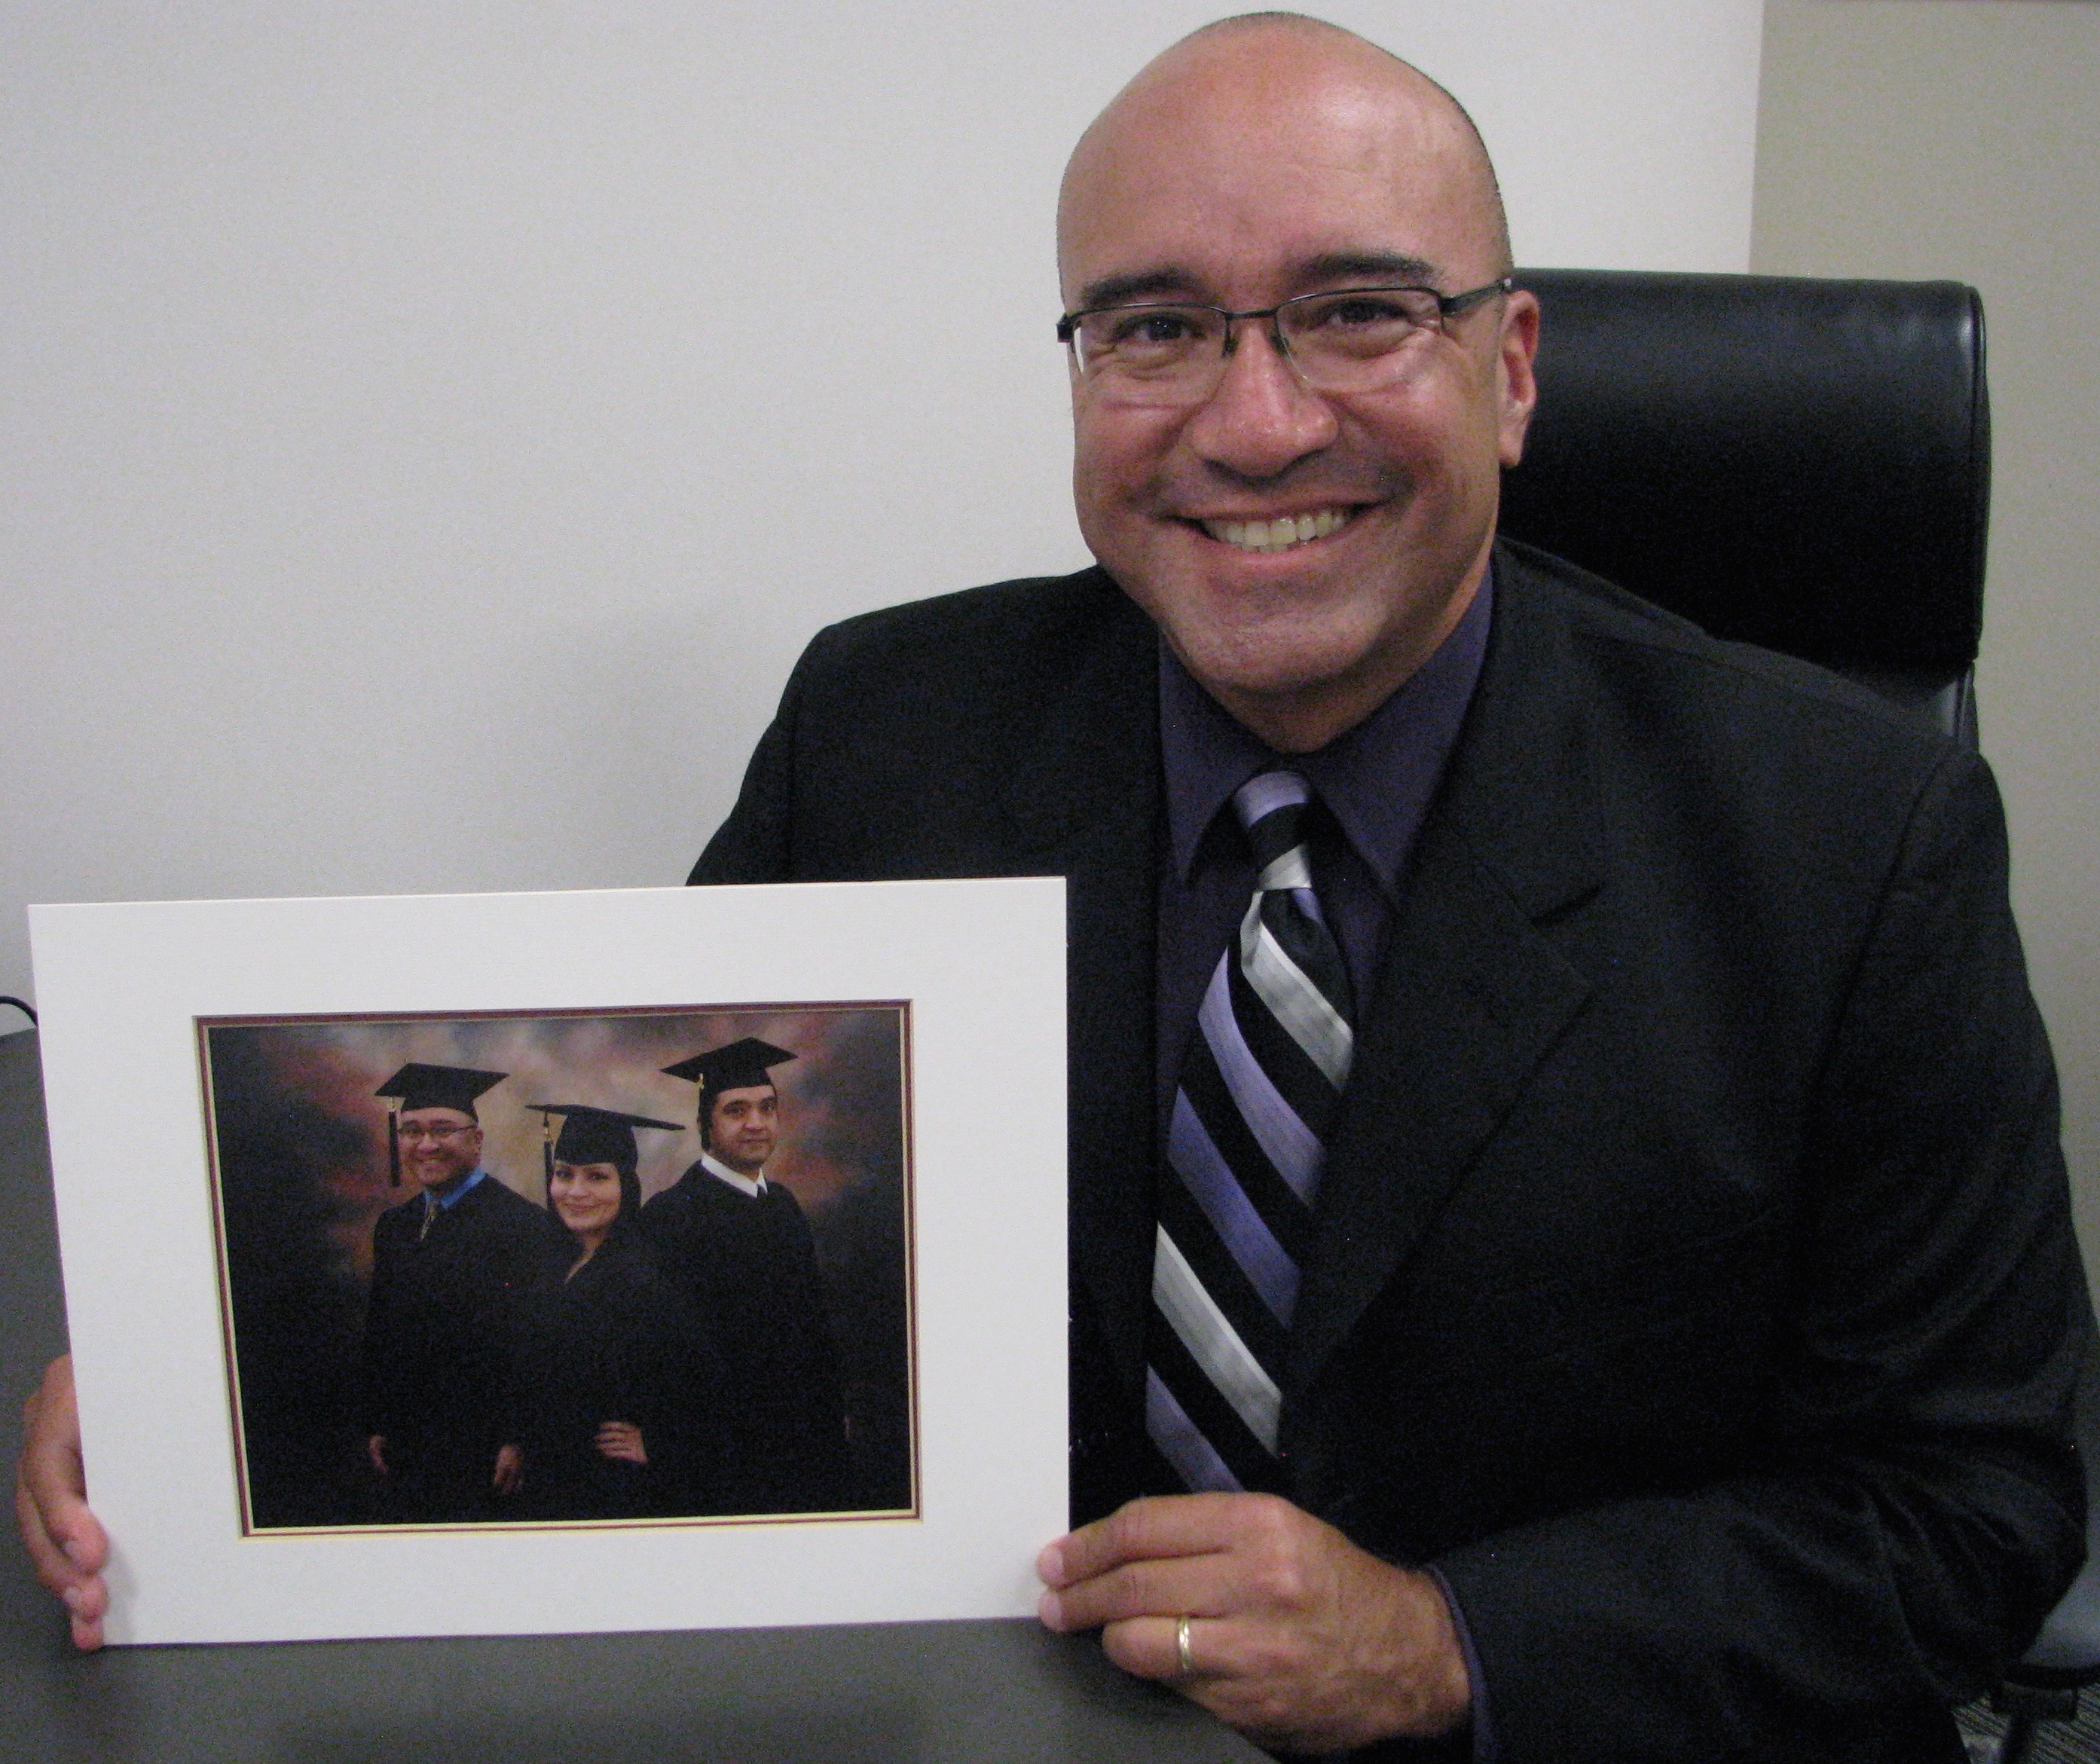 Michael Marquez (seated) holds a photo of himself, his brother Dean and his sister Cindy in graduation robes. Photo courtesy of UHCL Office of Communications.